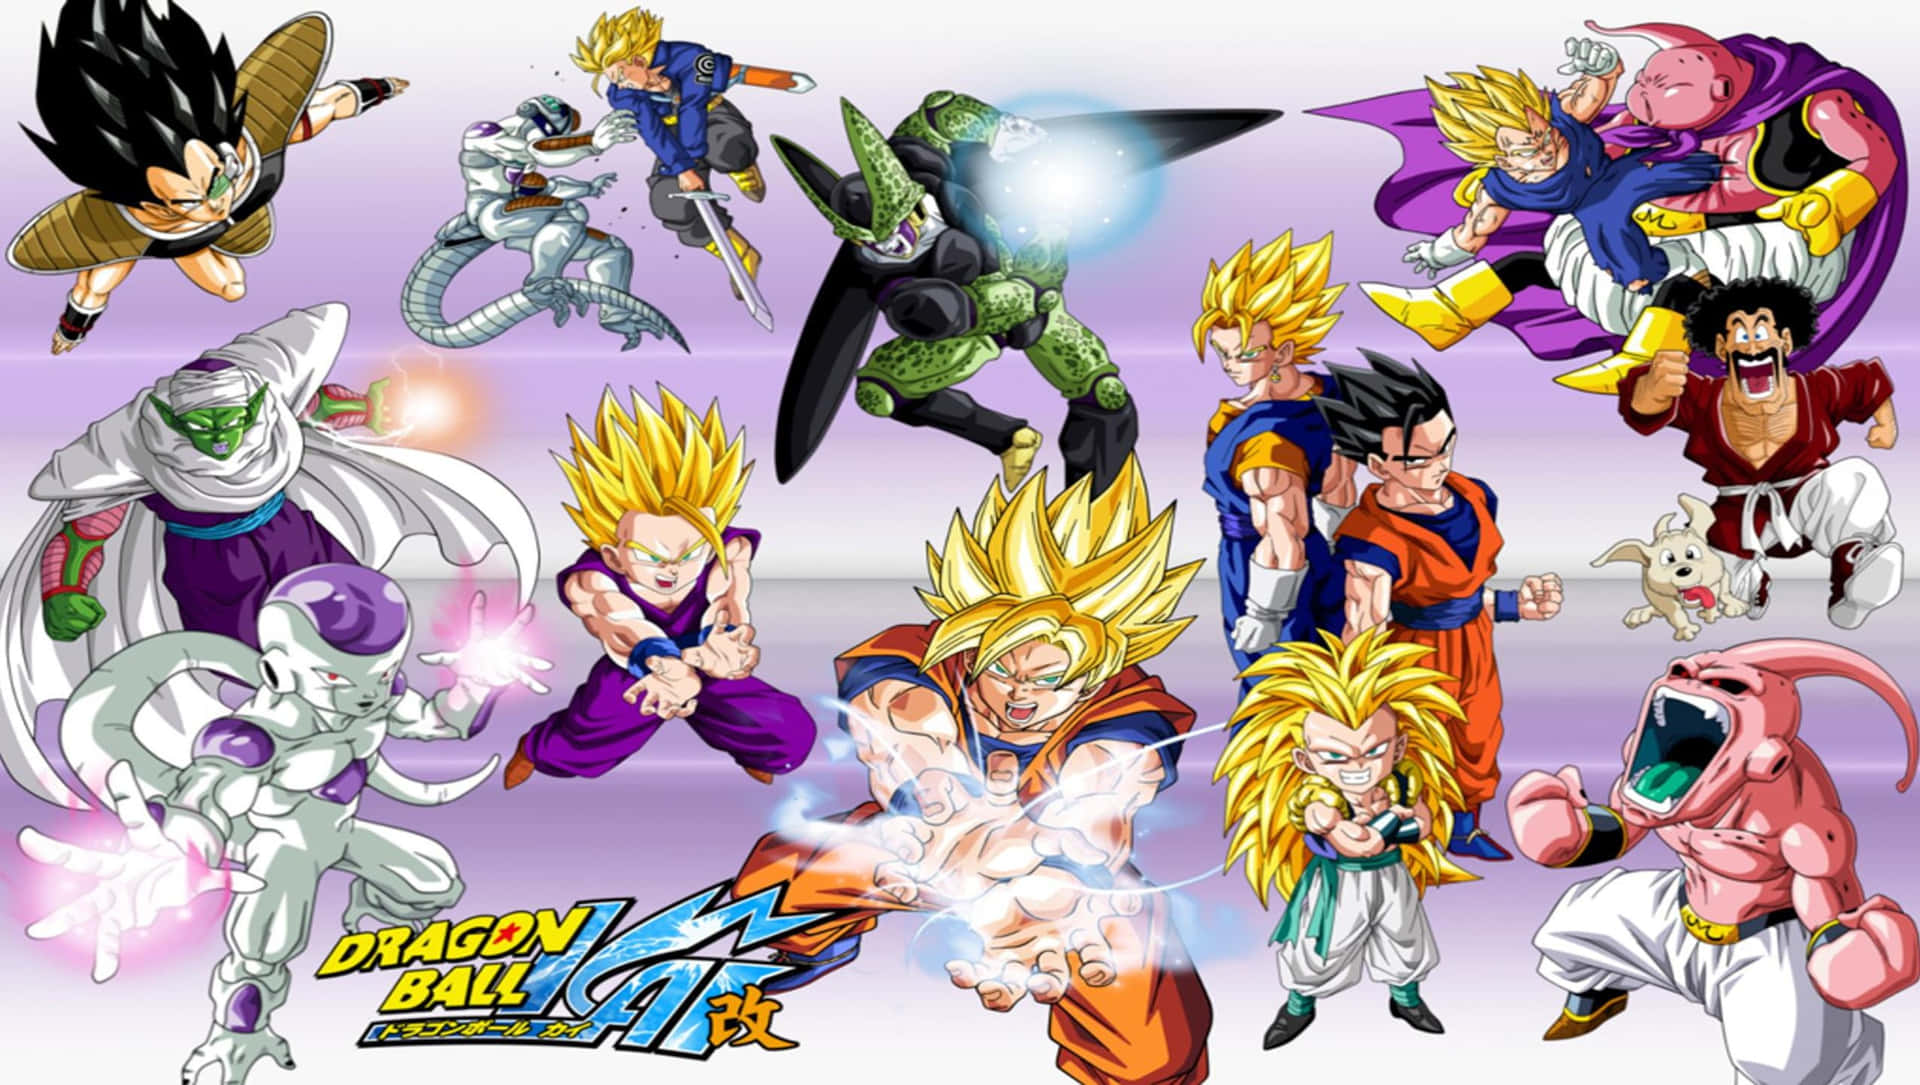 Go beyond and fight for justice in the world of 'Dragon Ball Z Kai' Wallpaper